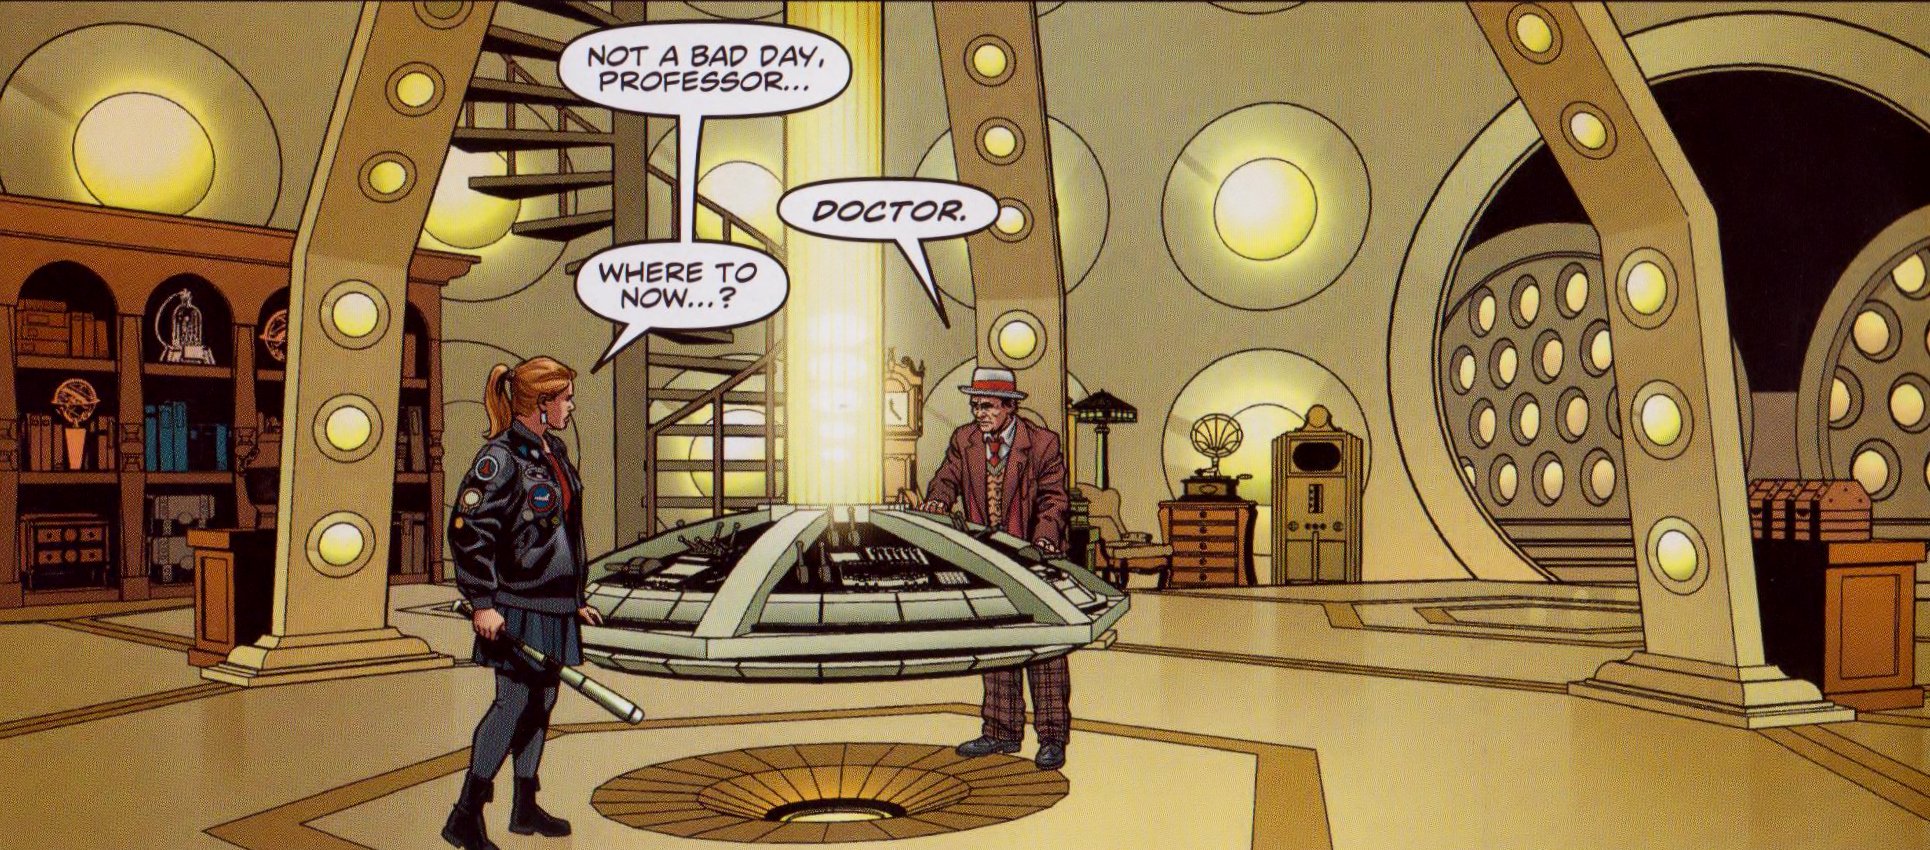 Doctor Who Comic Art on Twitter: "Is no one going to say anything about